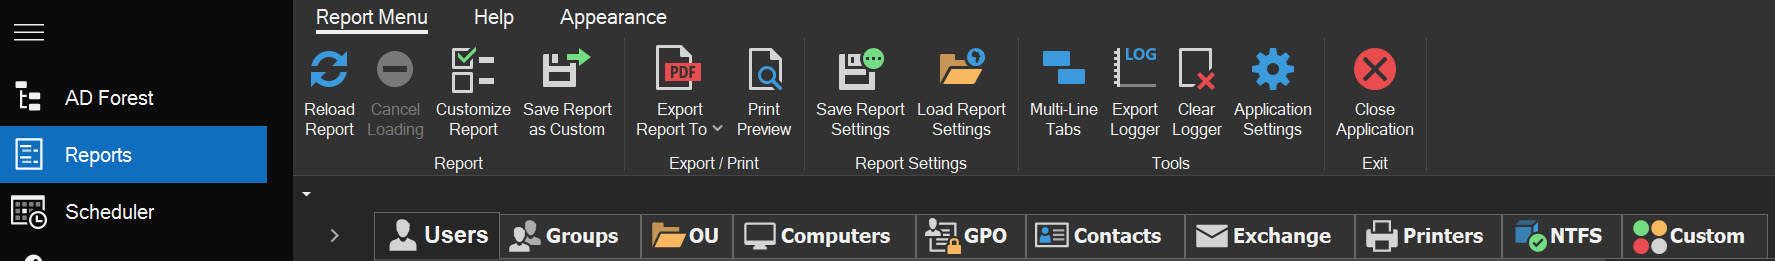 AD Reports select a report tab